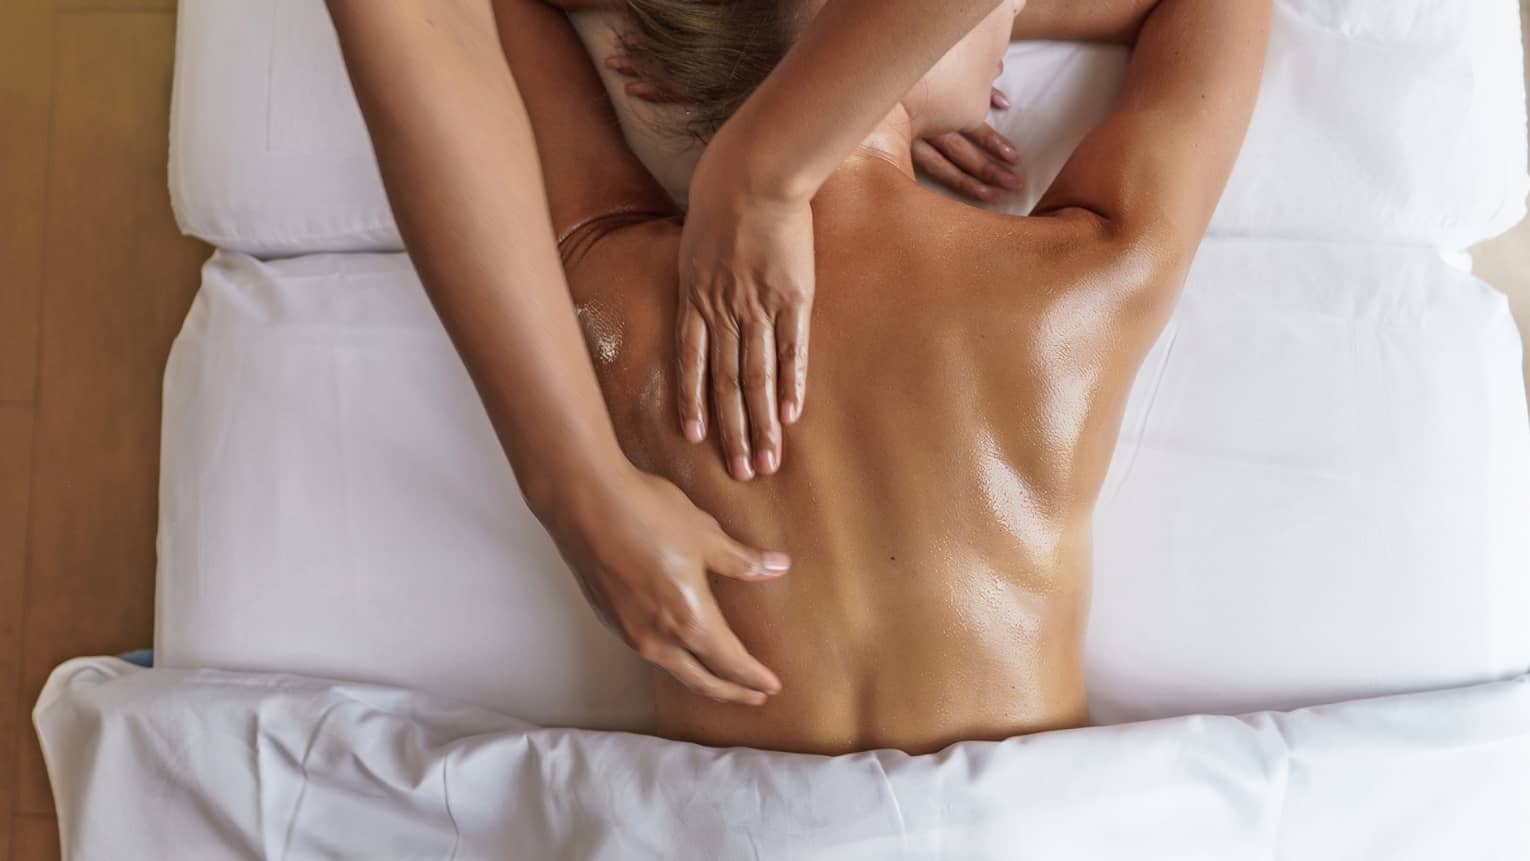 Overhead view of woman's back getting a massage